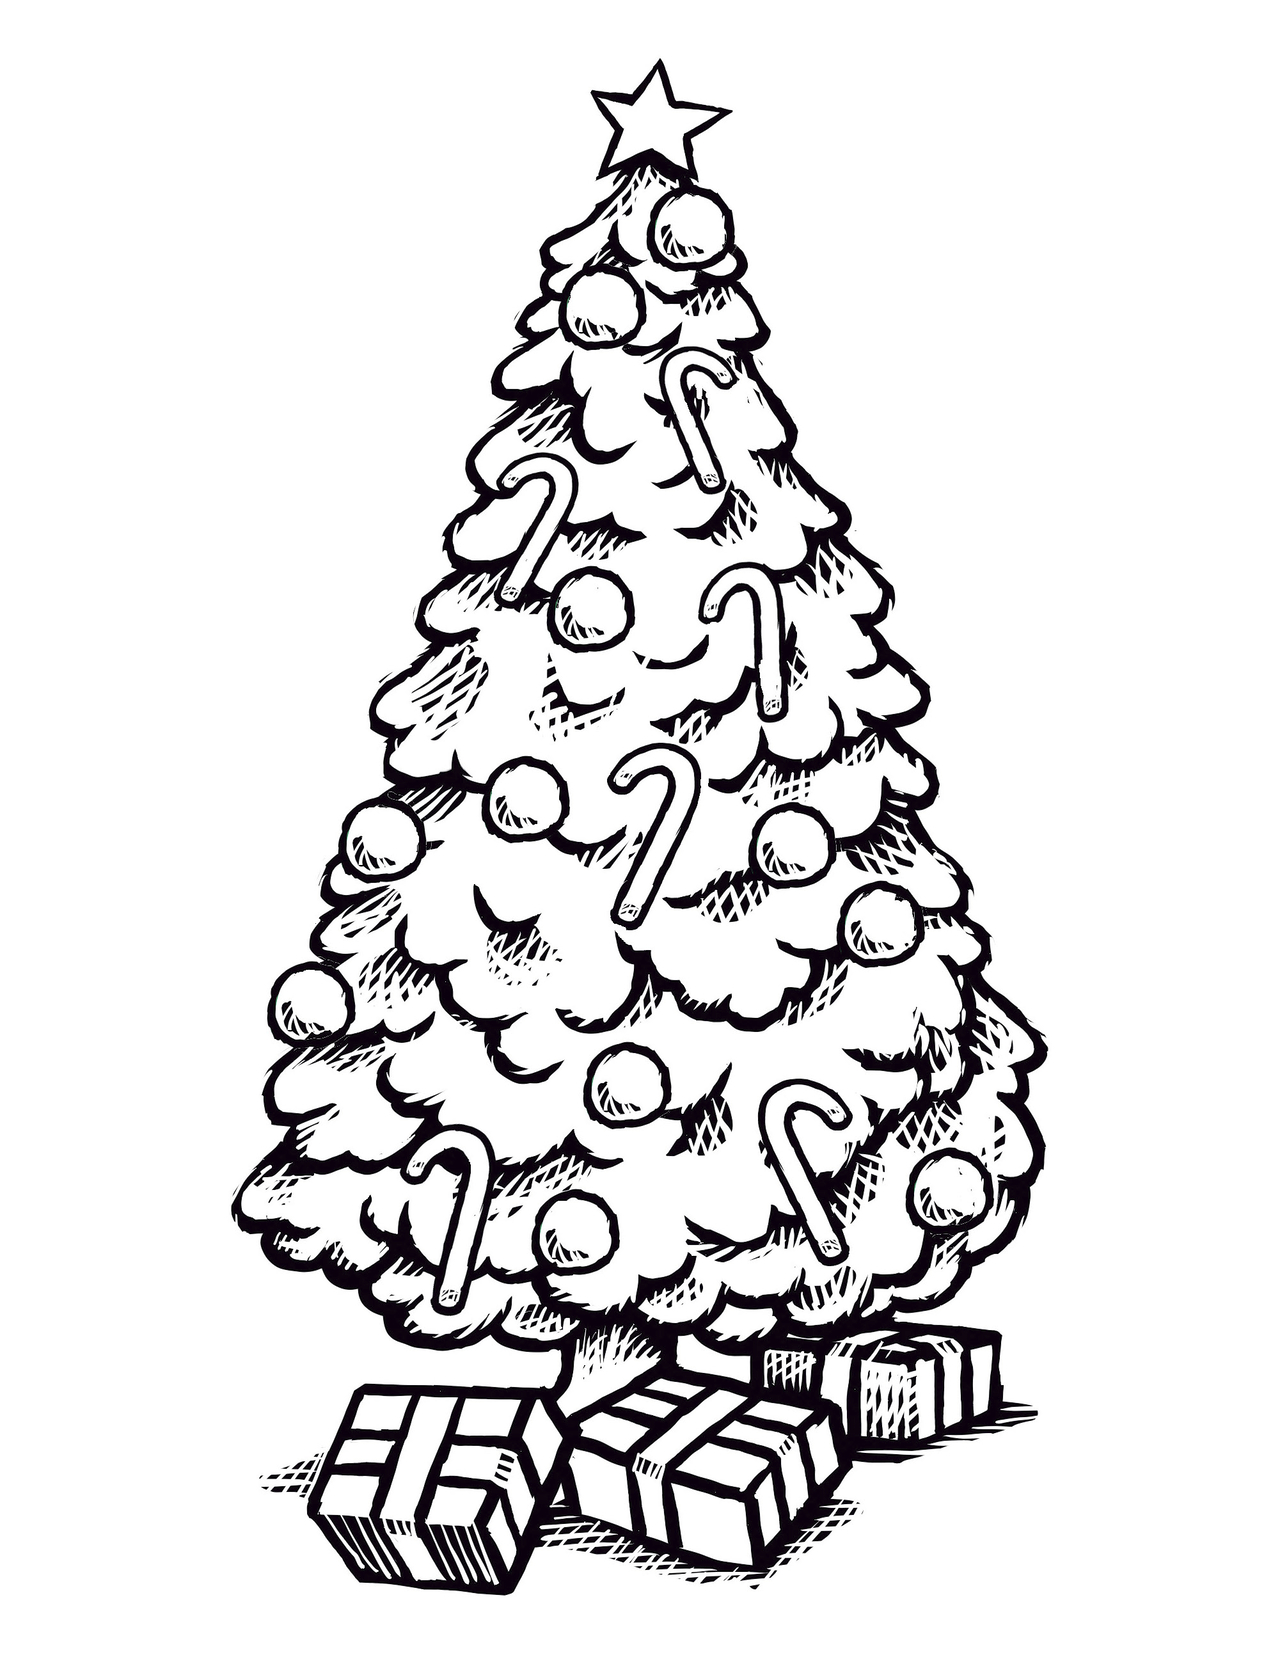 20-free-printable-christmas-tree-coloring-pages-everfreecoloring